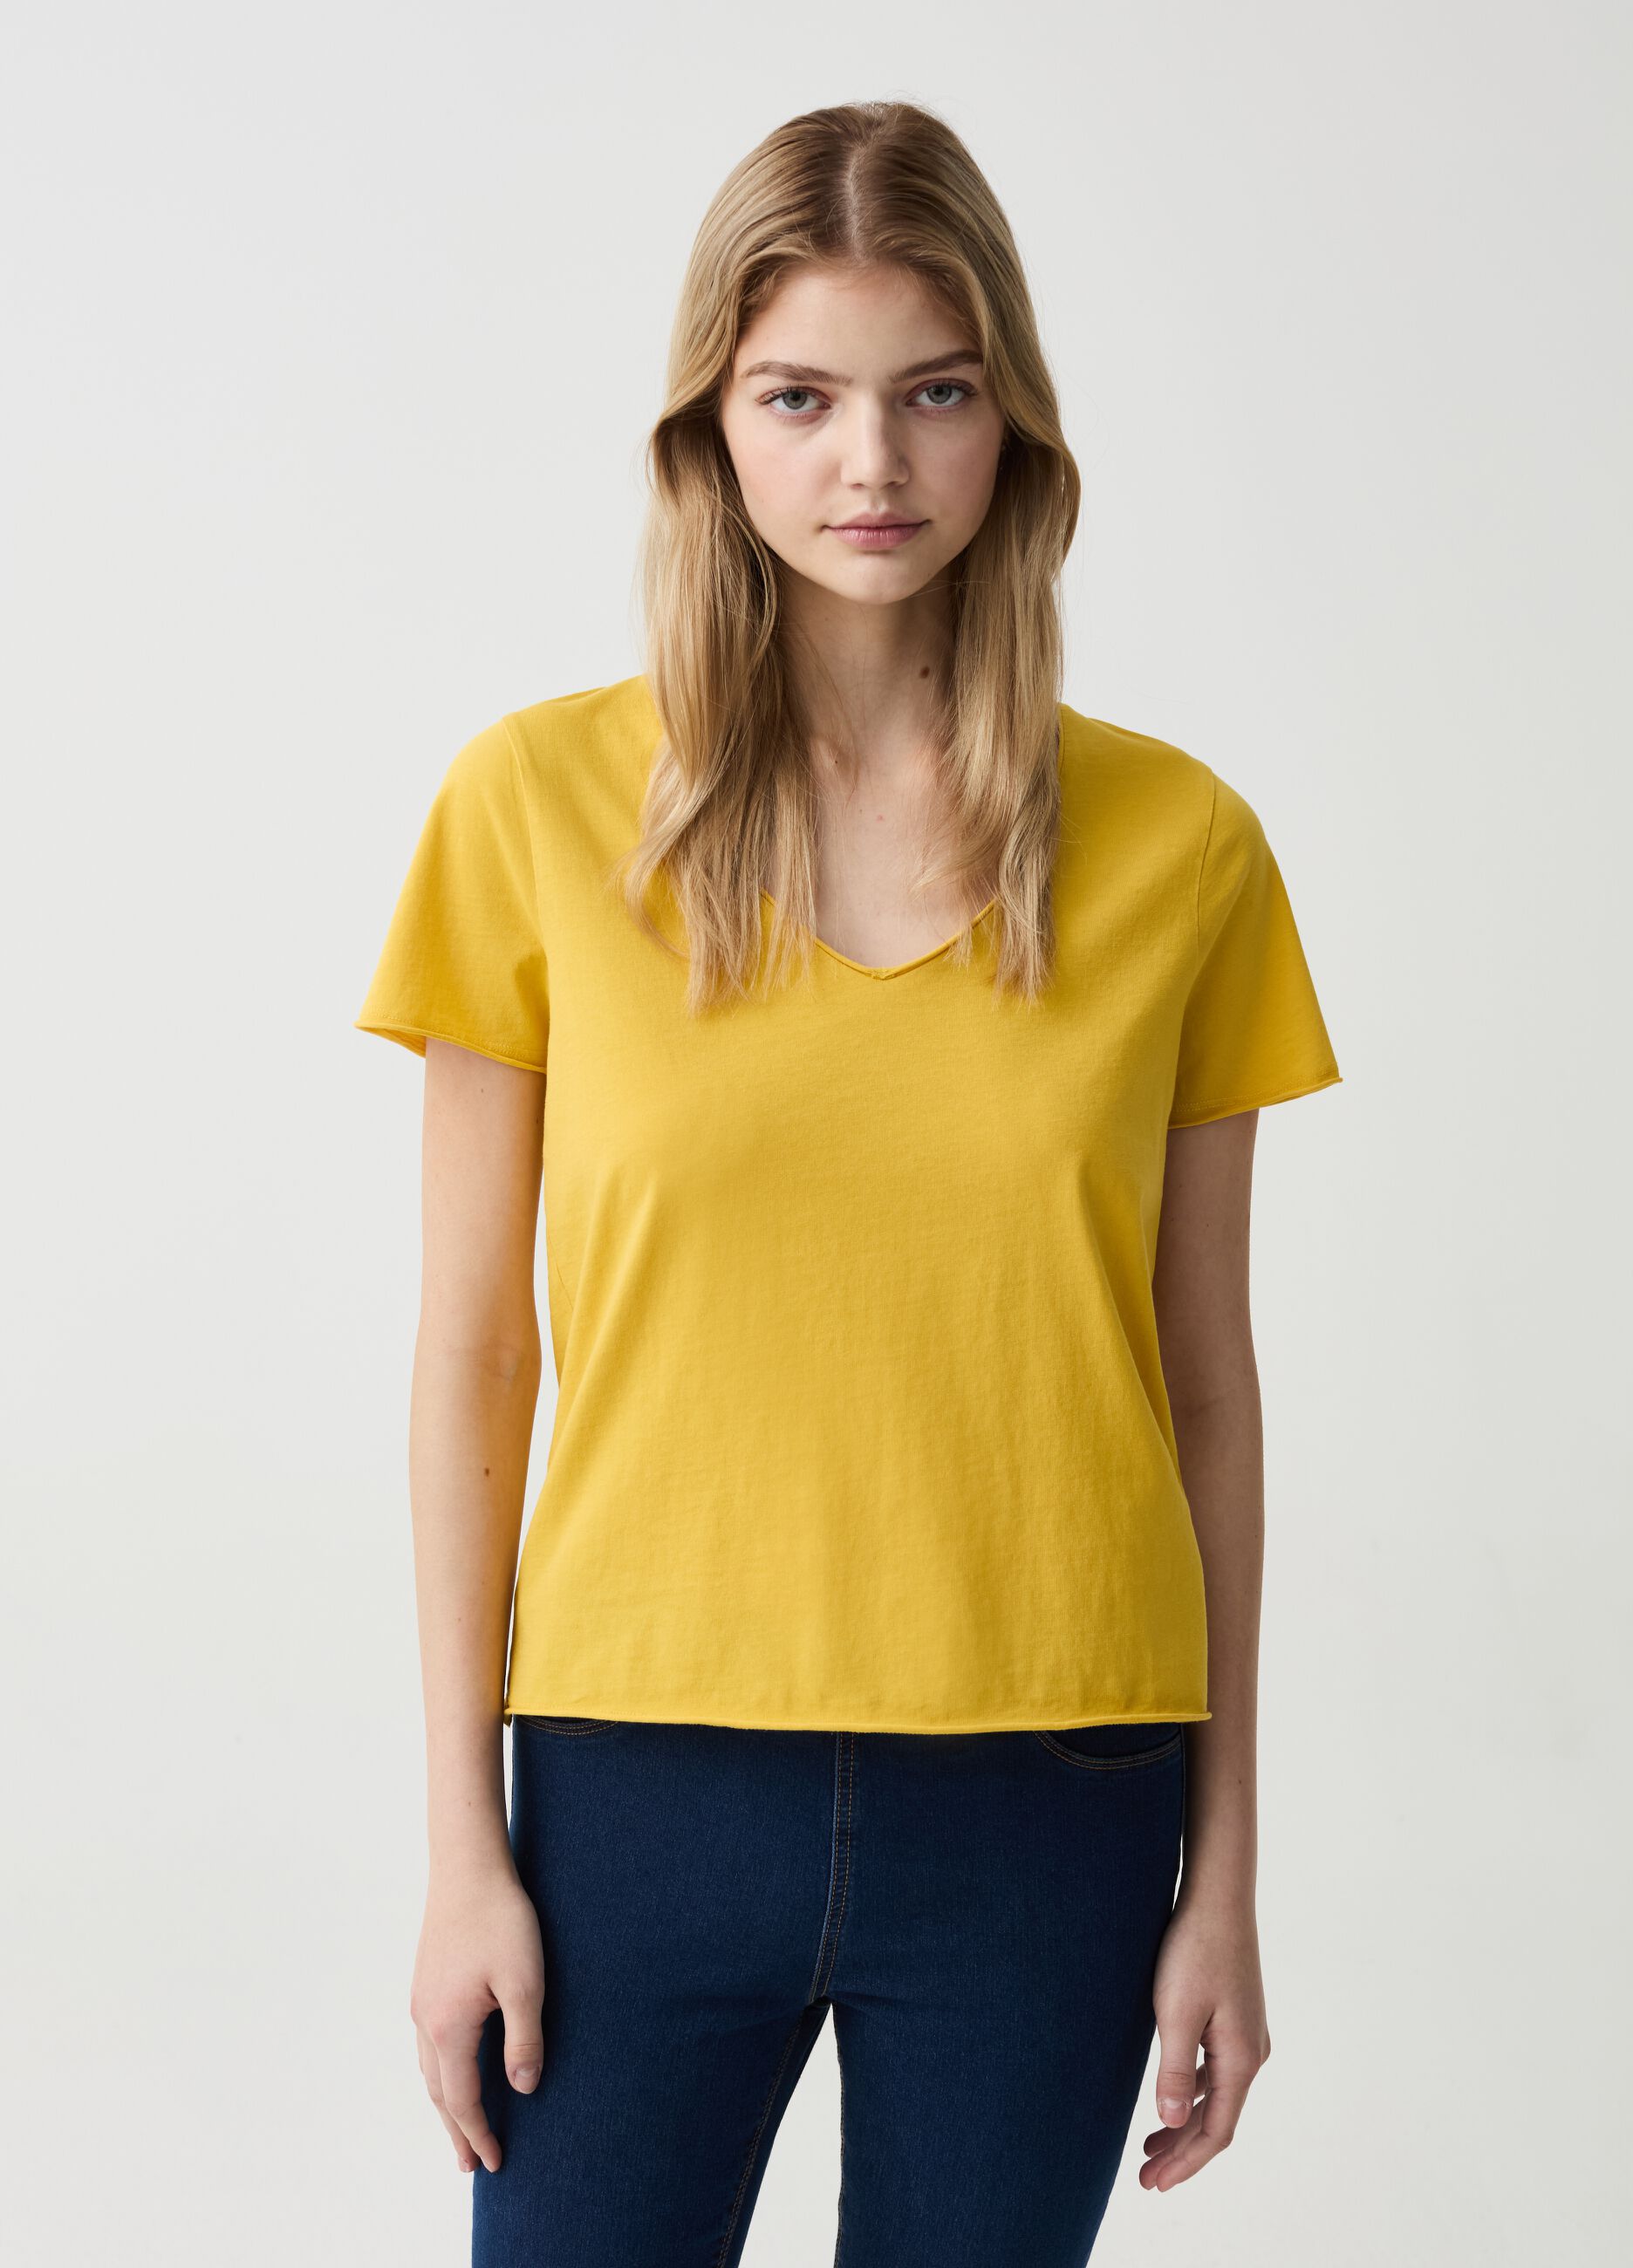 T-shirt with V neck and rolled edging